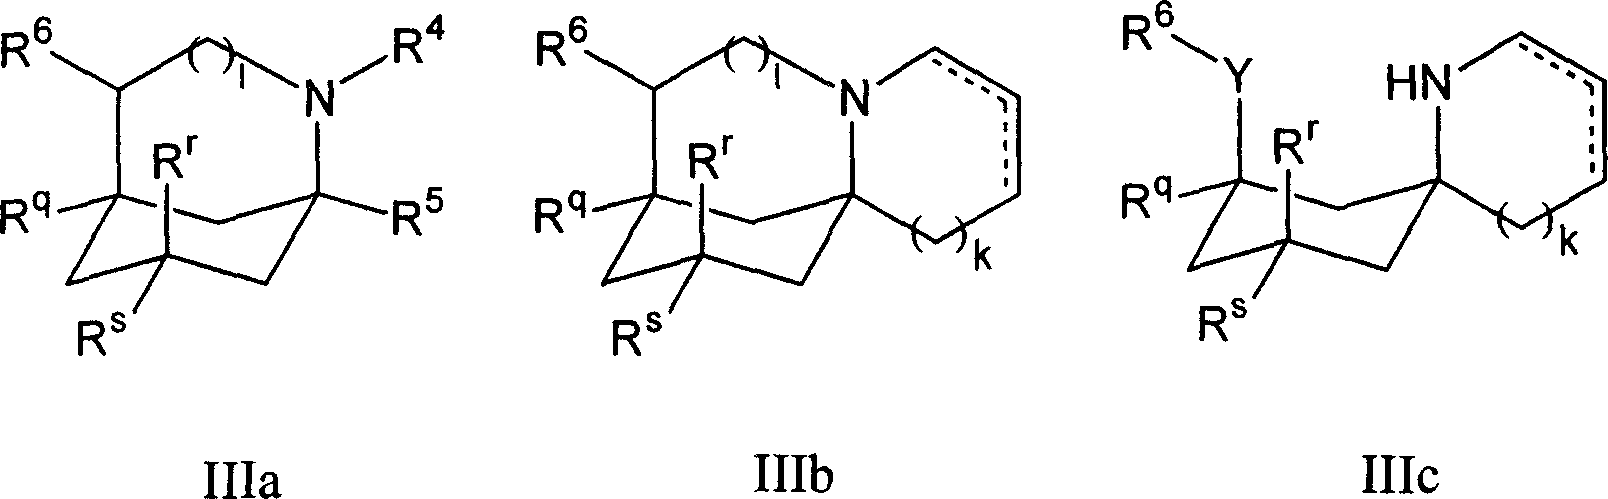 1-aminocyclohexane derivatives for the treatment of agitation and other behavioral disorders, especially those associated with alzheimer's disease